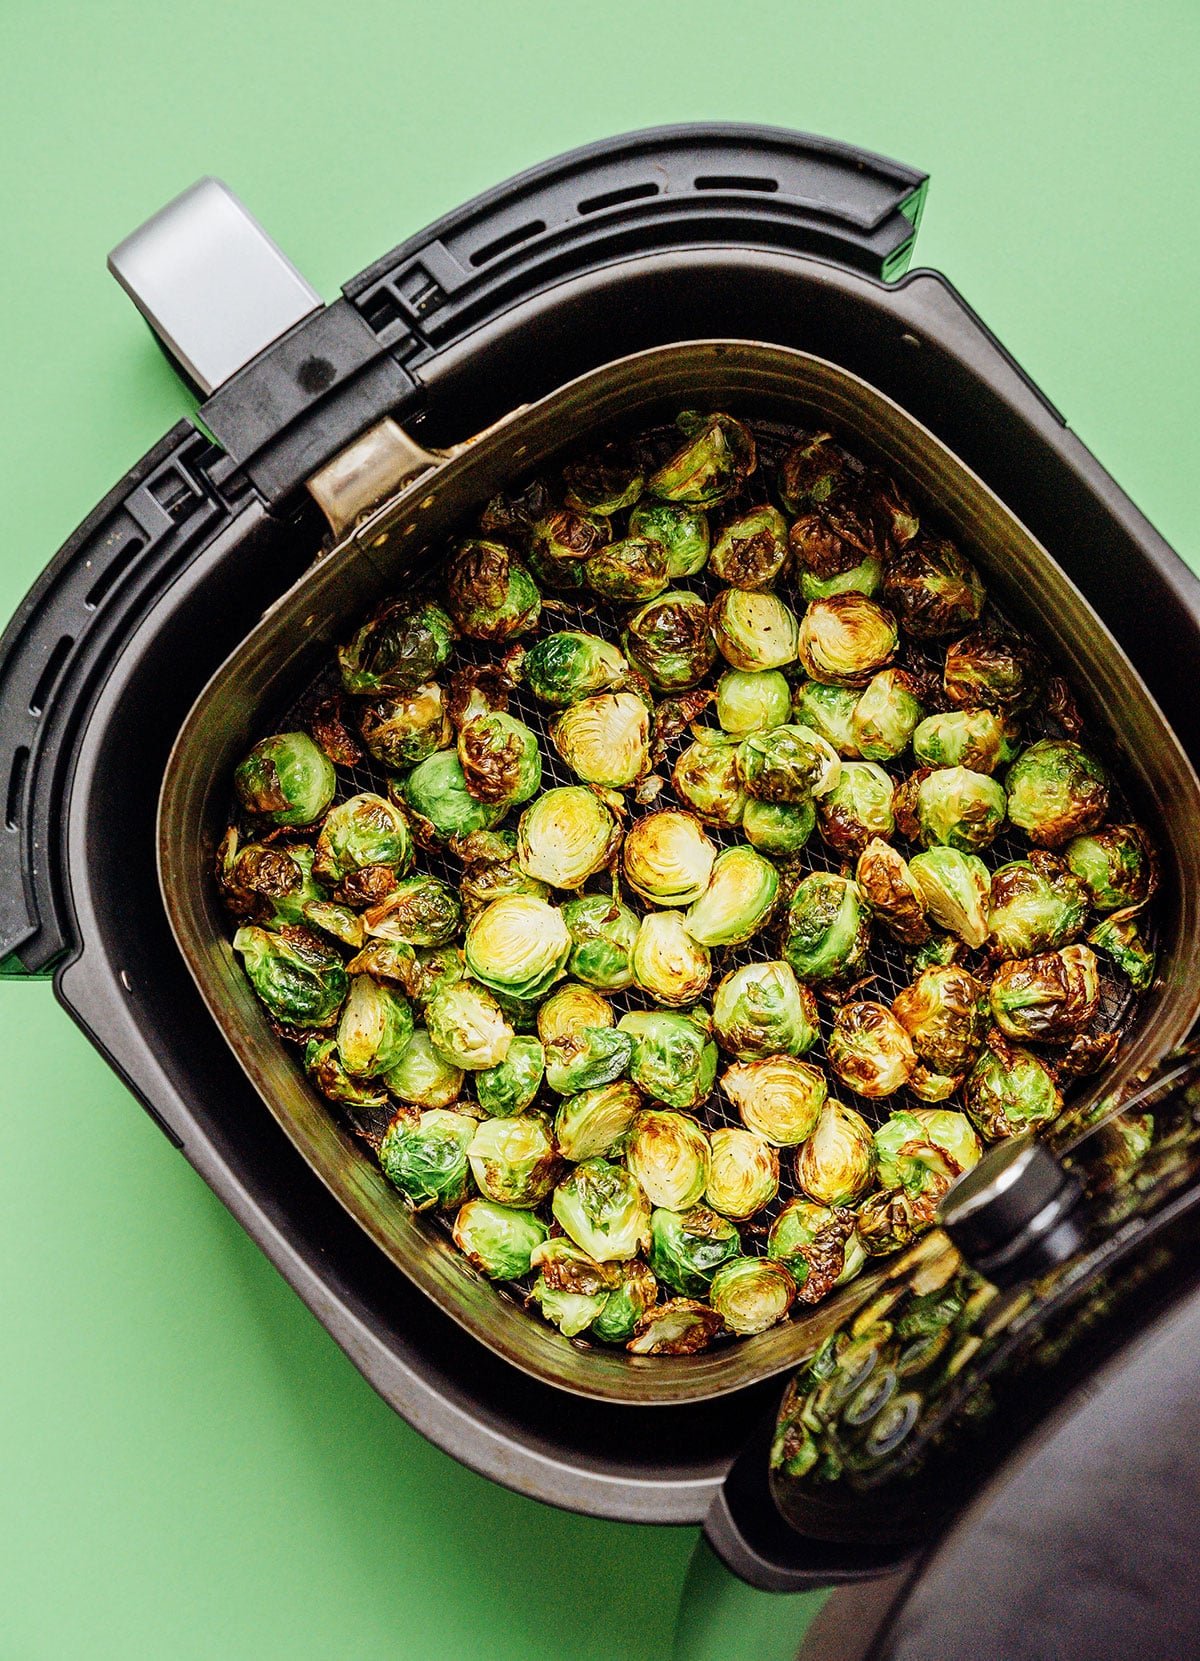 Brussels sprouts in an air fryer on a green background.